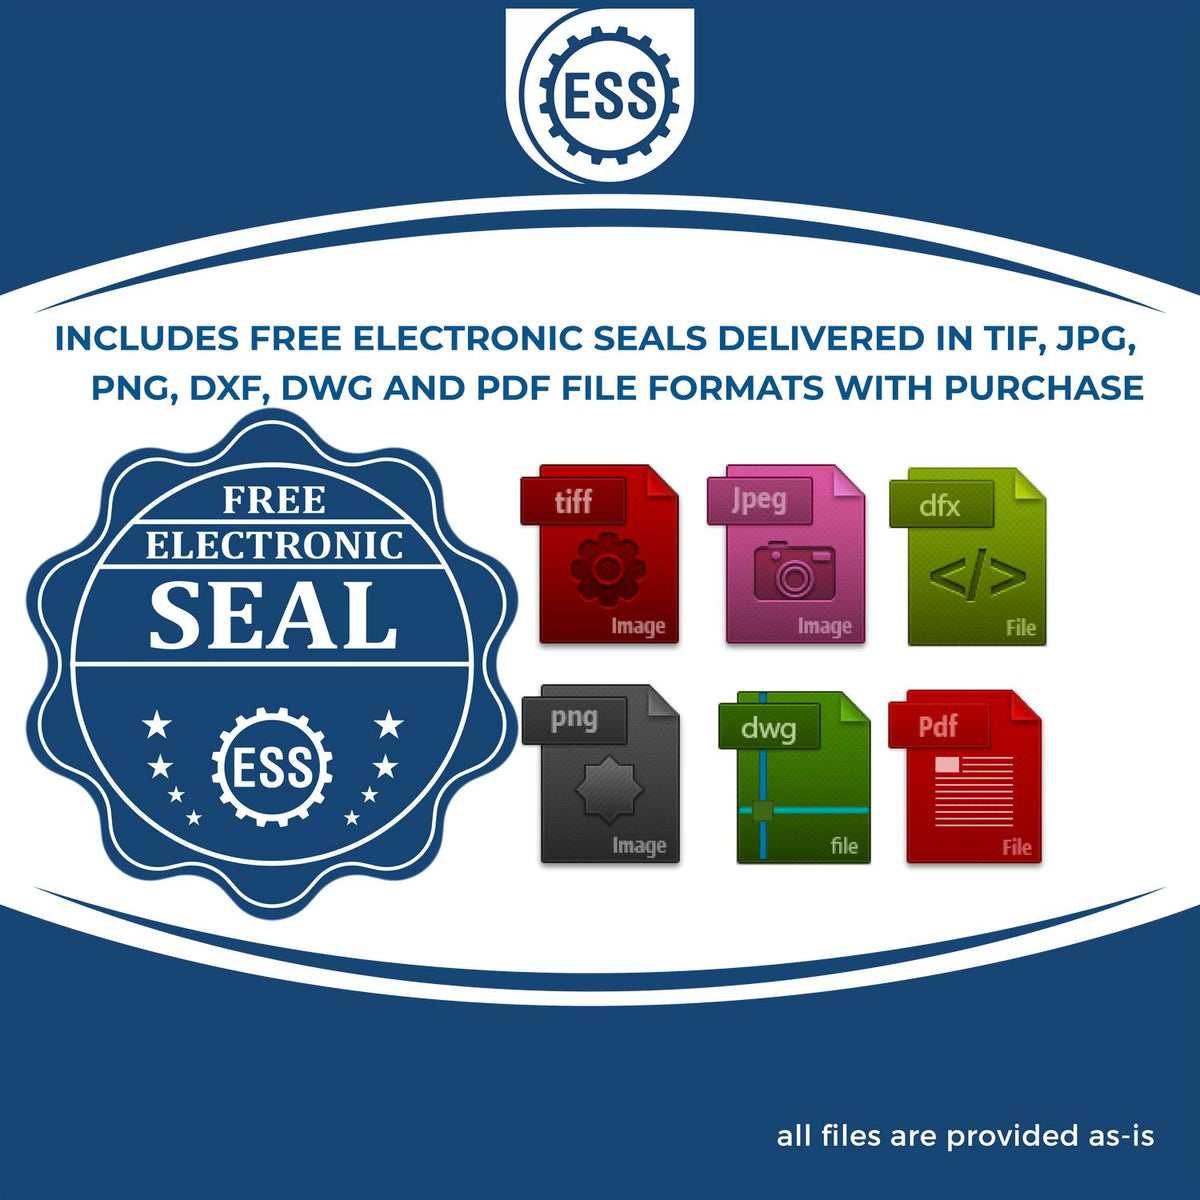 An infographic for the free electronic seal for the Missouri Geologist Desk Seal illustrating the different file type icons such as DXF, DWG, TIF, JPG and PNG.